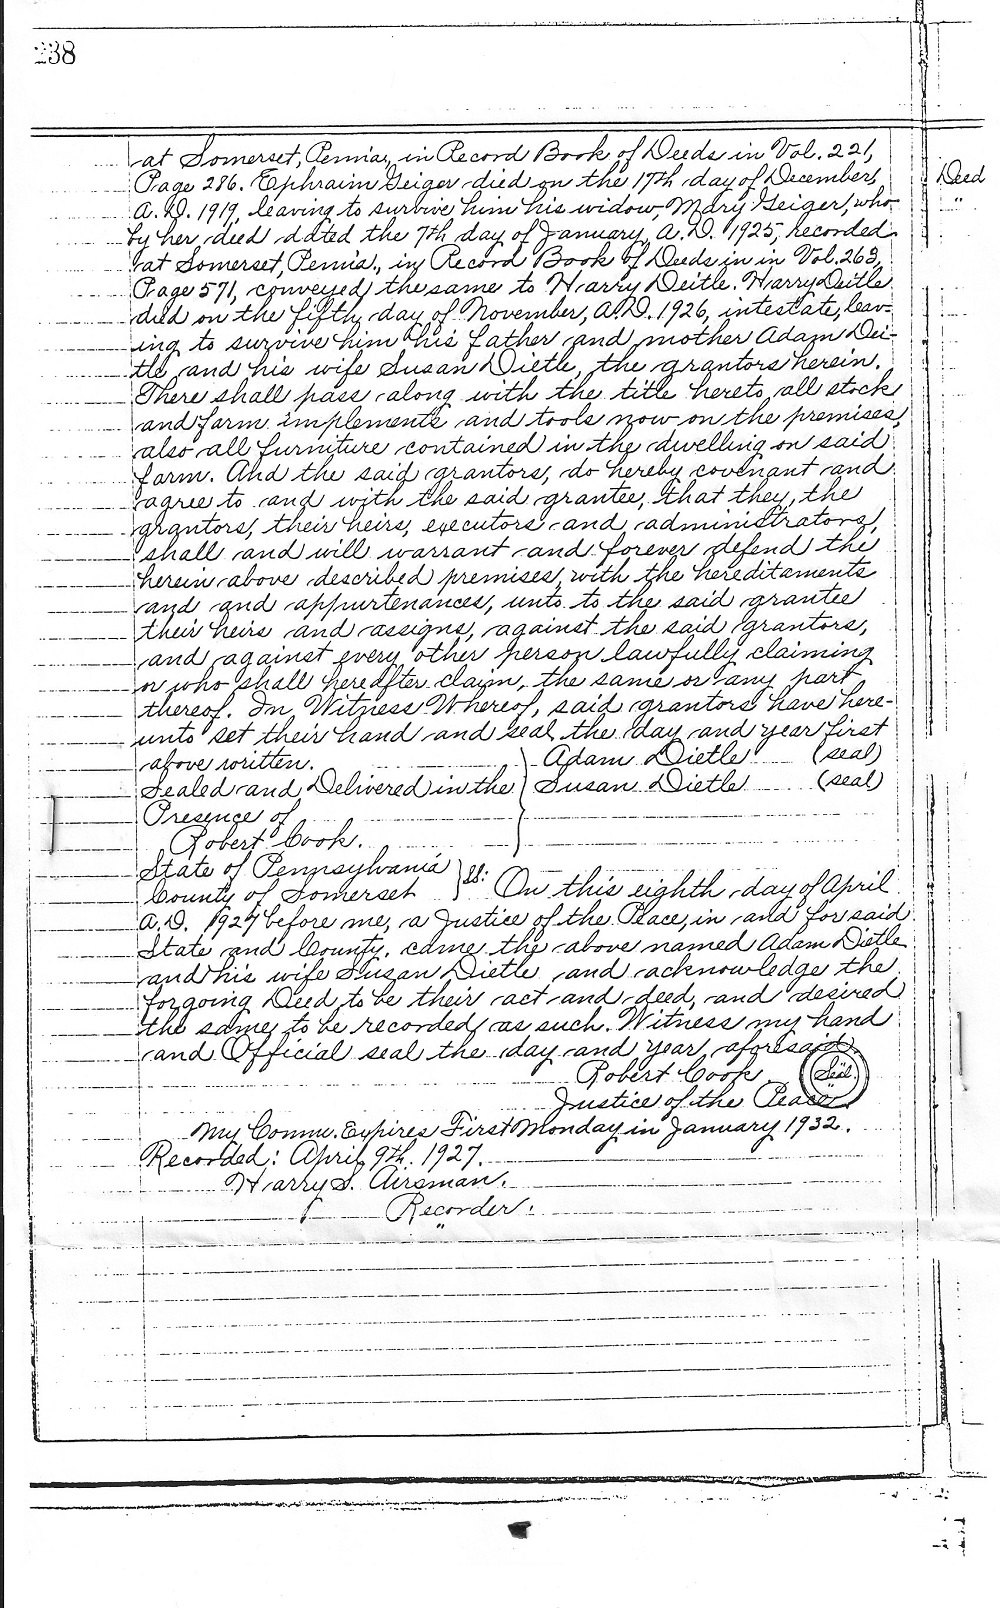 Page 238 of a 1927 Somerset County deed to Irvin Henry Dietle.